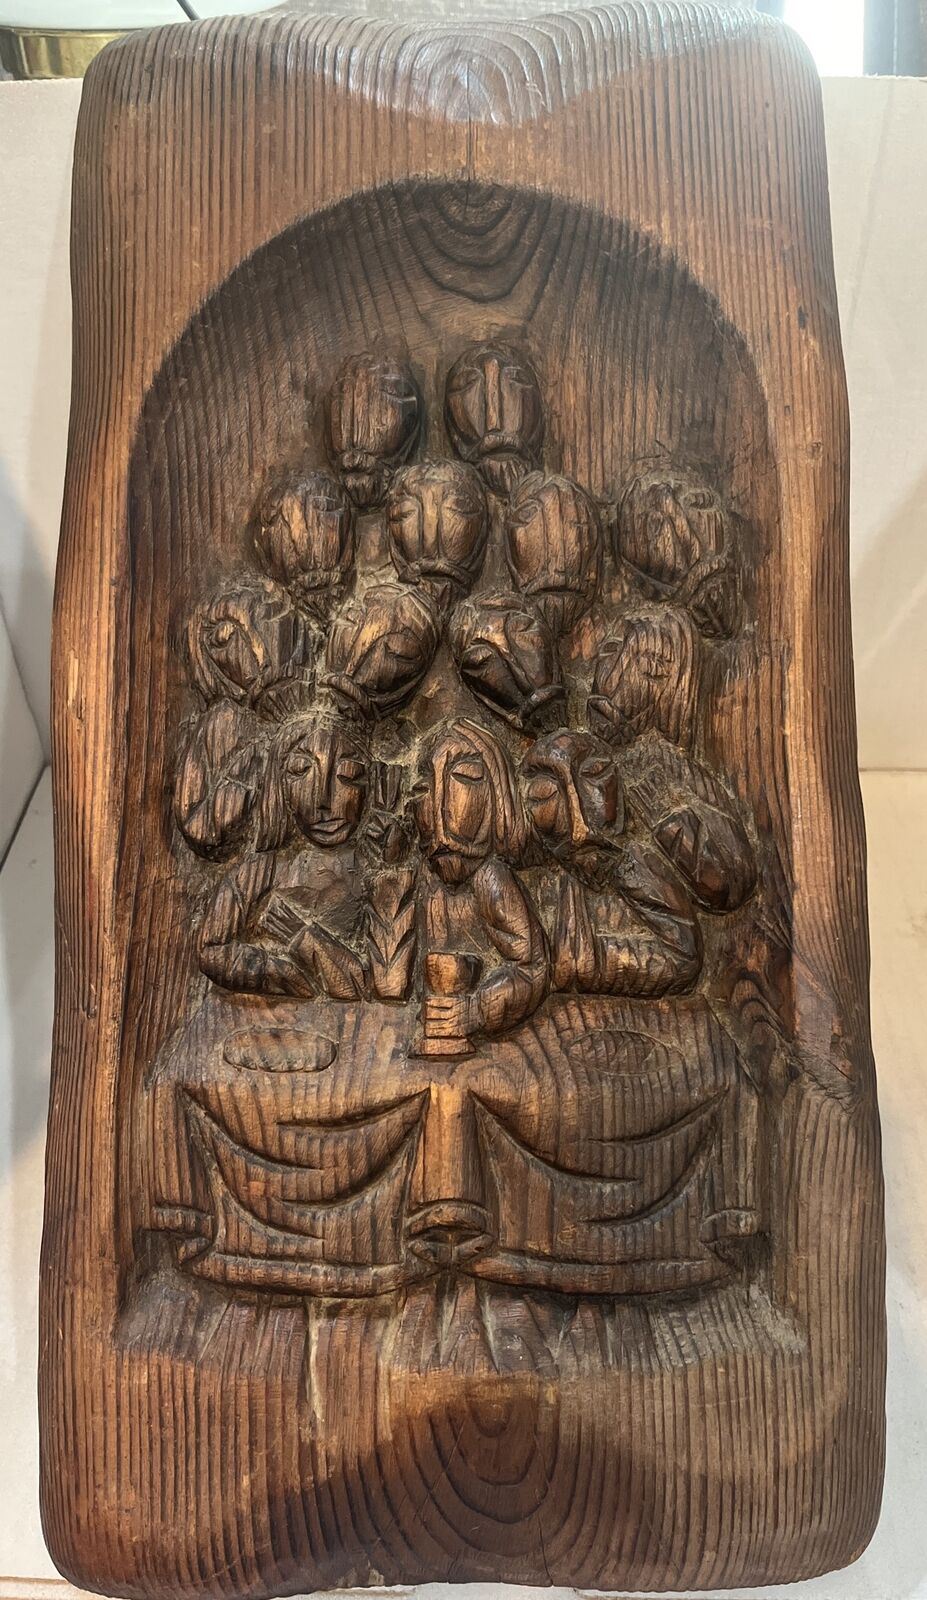 Last Supper 3D Hand Carved Wooden Sculpture Wall Plaque Art Work Religious